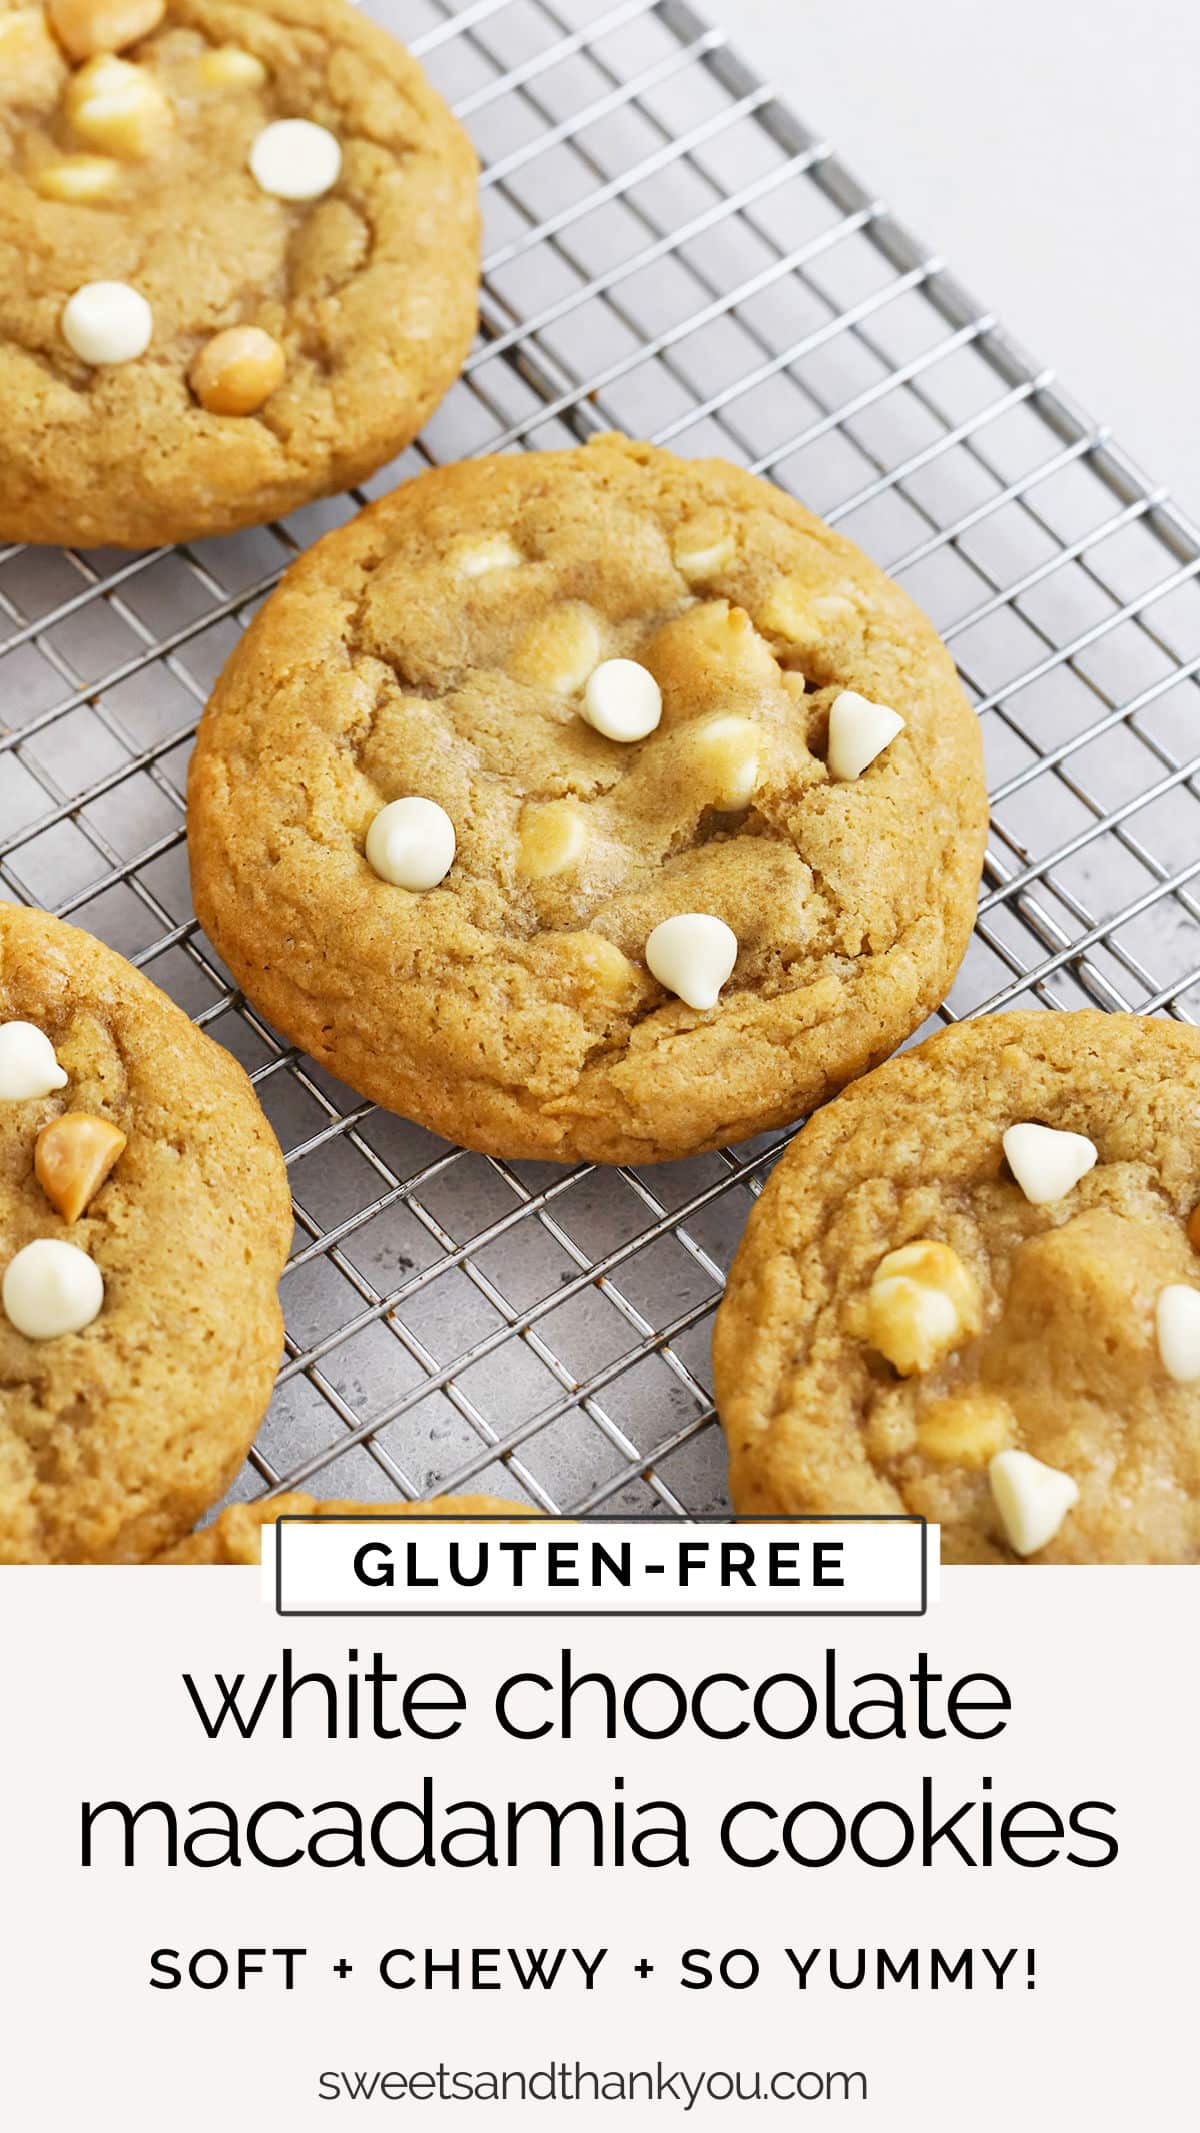 Gluten-Free White Chocolate Macadamia Nut Cookies - These soft, chewy gluten-free macadamia cookies are loaded with white chocolate & nuts. You'll love their yummy flavor! // gluten-free macadamia nut cookies // gluten-free white chocolate chip macadamia nut cookies / gluten-free white chocolate chip macadamia cookies // gluten-free white chocolate macadamia cookie recipe // gluten-free christmas cookies / easy gluten-free cookie recipe / gluten free white chocolate cookie recipe /